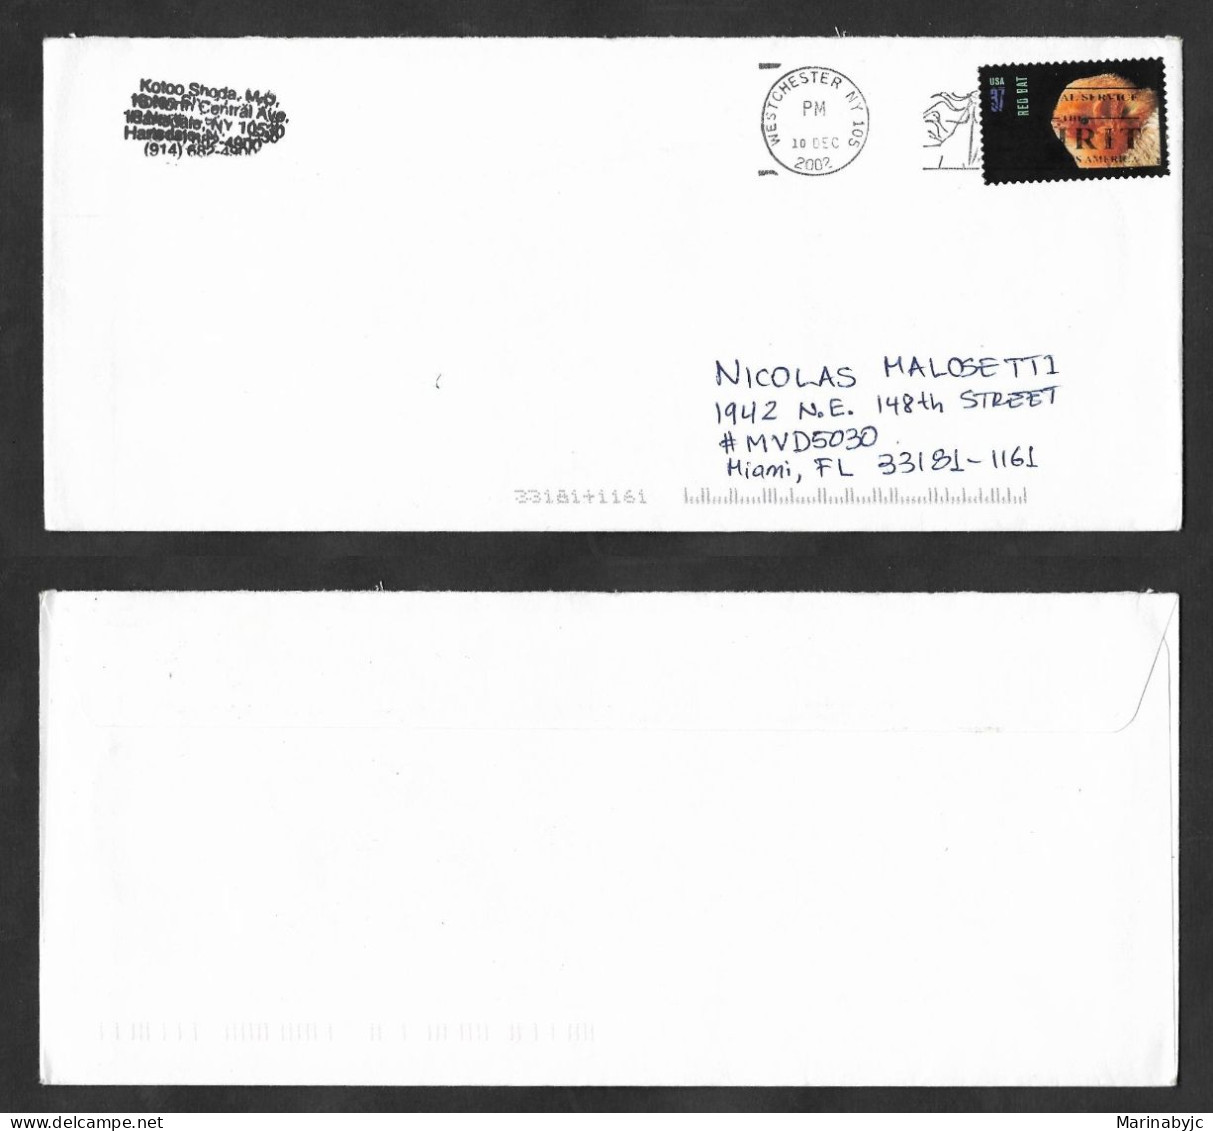 SE)2002 UNITED STATES, BATS OF AMERICA, RED BAT, CIRCULATED COVER FROM NEW YORK TO MIAMI USA, VF - Usados